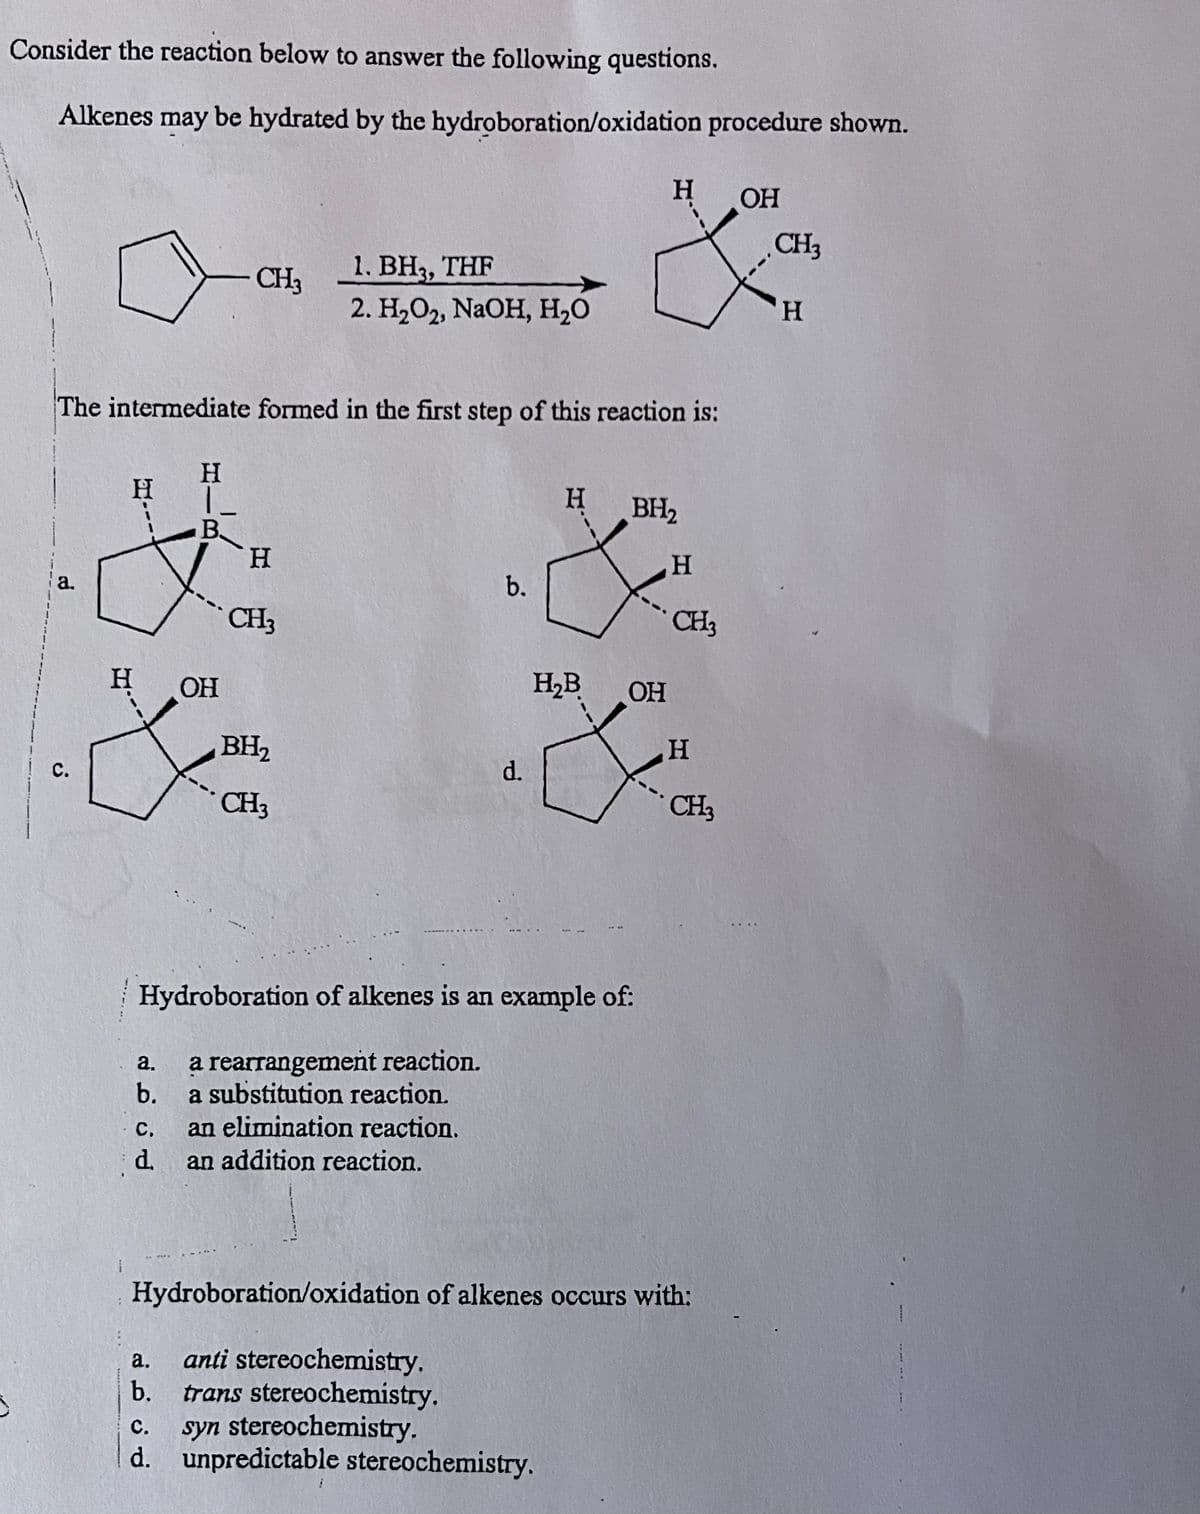 Consider the reaction below to answer the following questions.
Alkenes may be hydrated by the hydroboration/oxidation procedure shown.
a.
C.
The intermediate formed in the first step of this reaction is:
H
- CH3
H
L
B.
OH
H
CH3
1. BH3, THF
2. H₂O2, NaOH, H₂O
BH₂
CH3
C. an elimination reaction.
an addition reaction.
d.
b.
d.
a.
anti stereochemistry.
b. trans stereochemistry.
H₂B
Hydroboration of alkenes is an example of:
a.
a rearrangement reaction.
b. a substitution reaction.
H
OH
&am
CH3
H
H BH₂
&
C. syn stereochemistry.
d. unpredictable stereochemistry.
OH
H
CH3
Hydroboration/oxidation of alkenes occurs with:
H
CH3